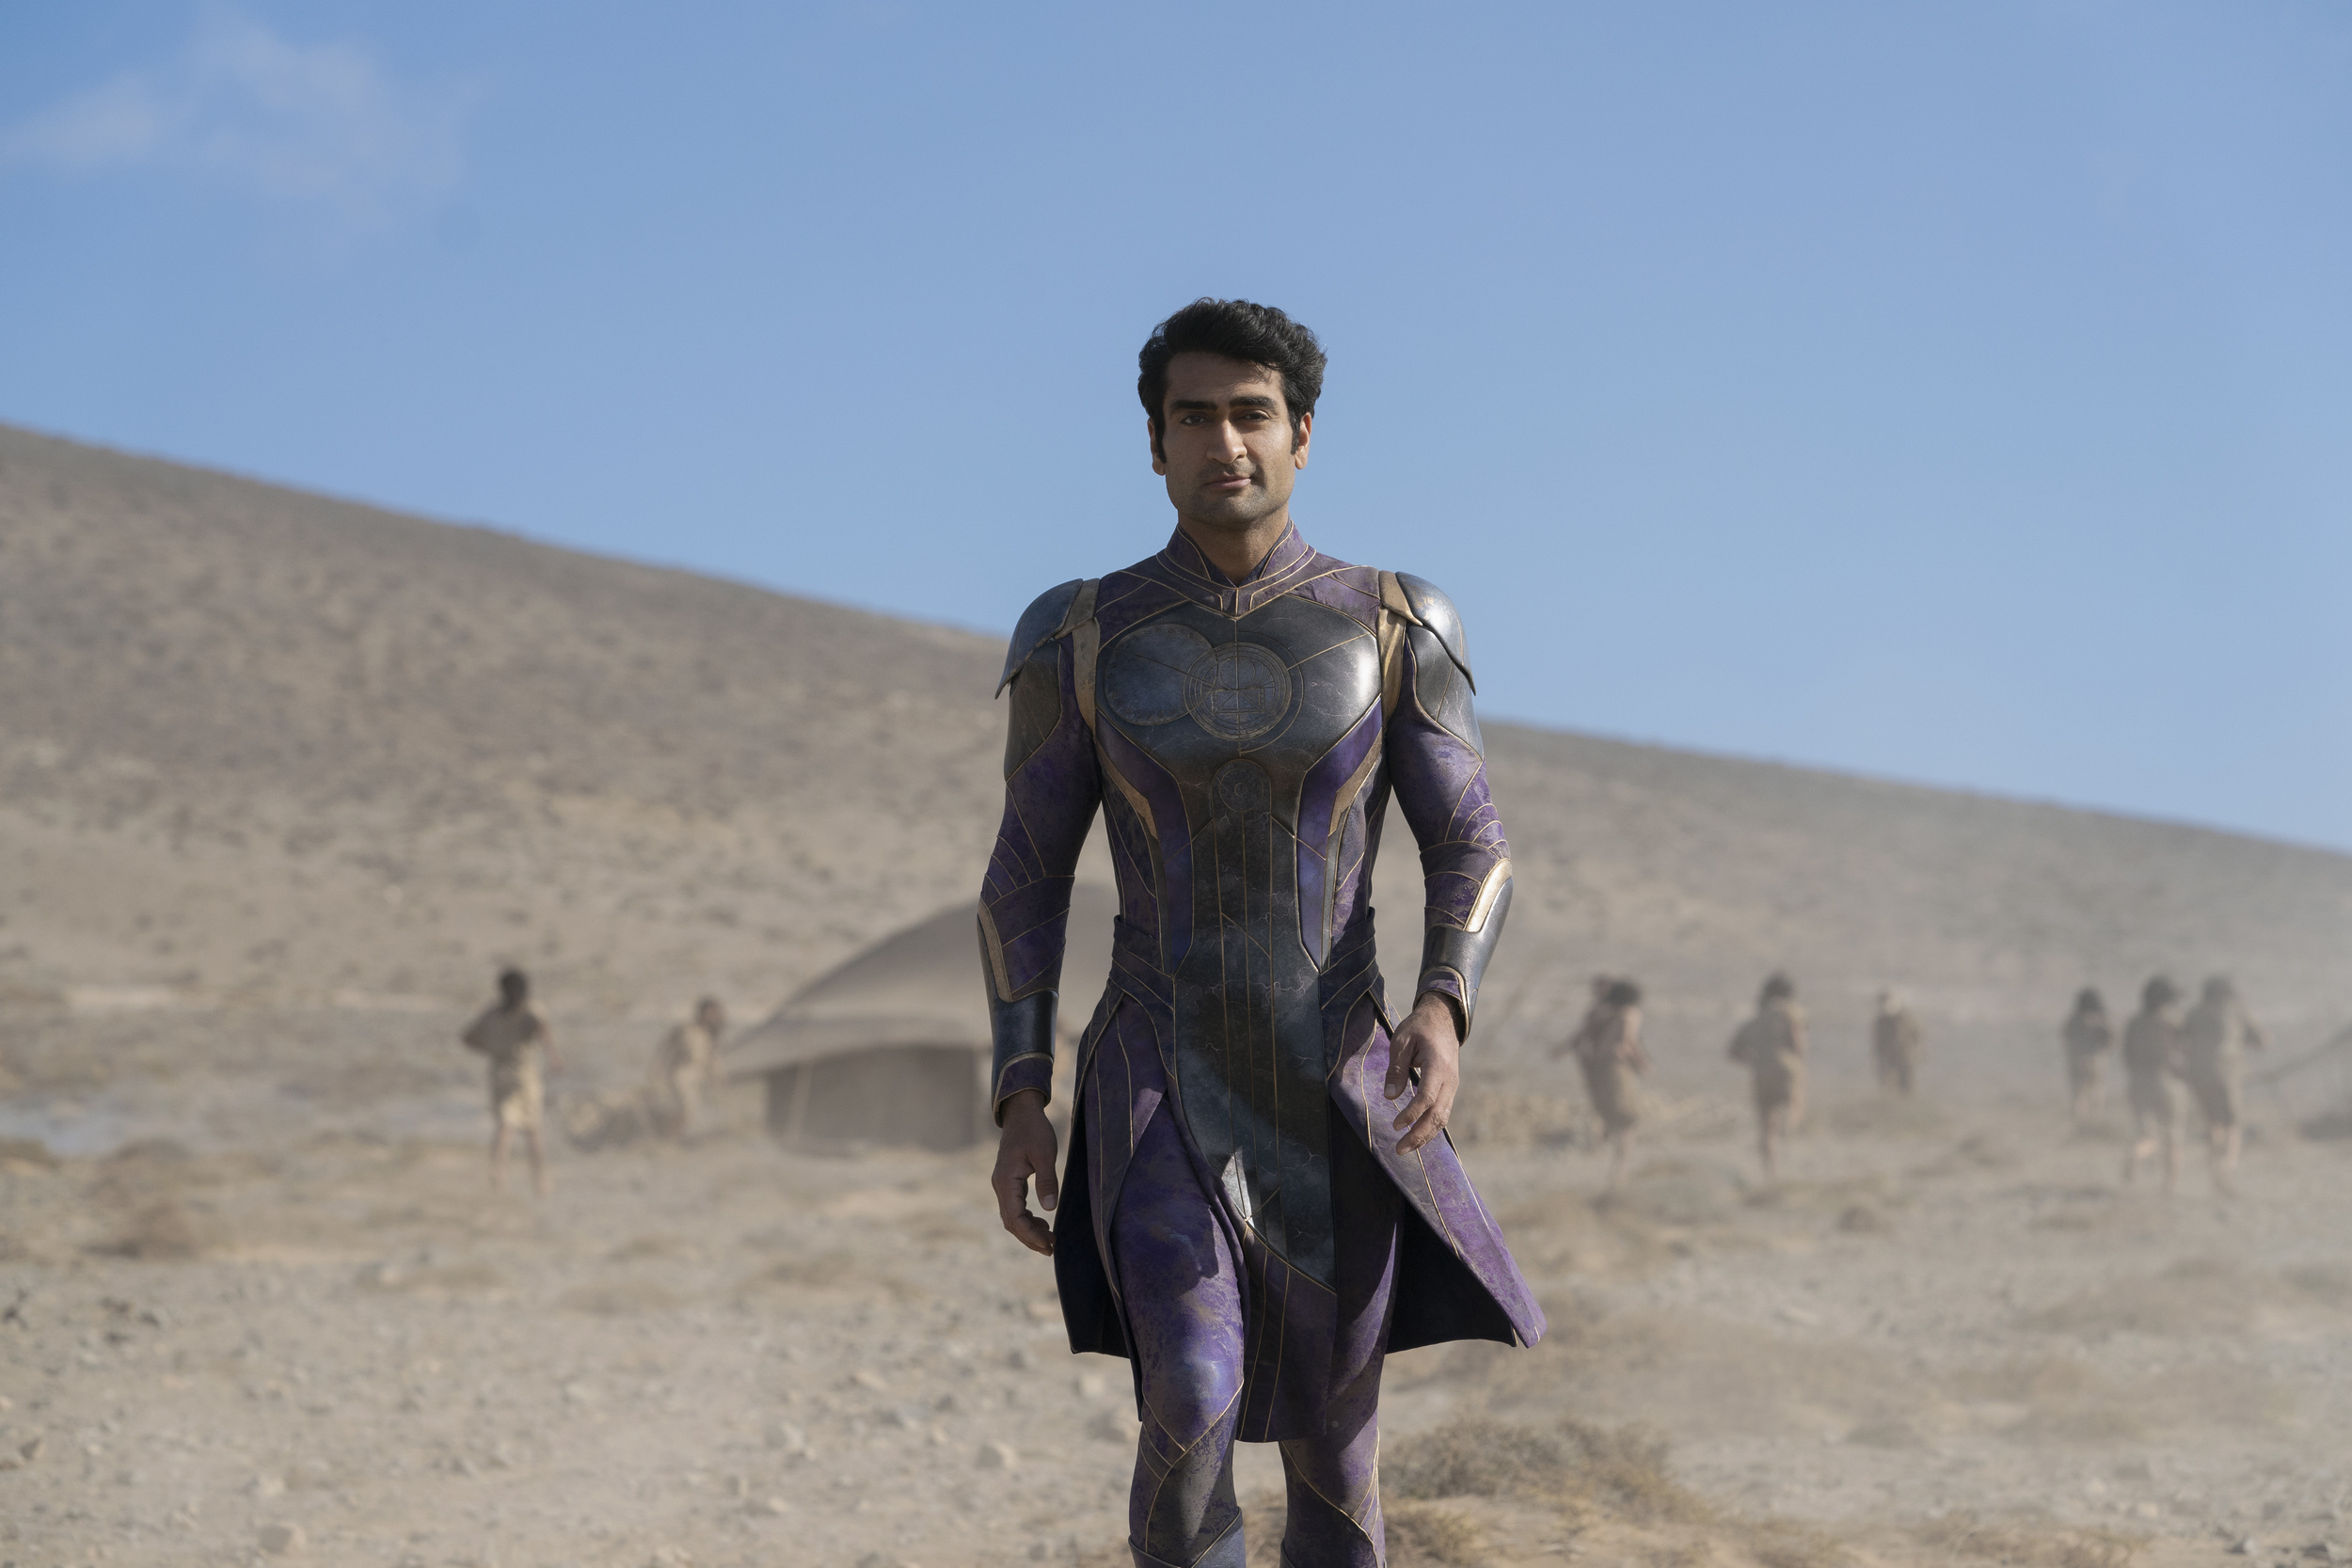 <p>Originally, there was a cameo written into “Vol. 3” for Kumail Nanjiani, a friend of Gunn’s. Then, the actor was cast as Kingo in “Eternals,” nixing the cameo. Kumail was probably too busy getting shredded to shoot the cameo anyway. Speaking of too busy, Miley Cyrus couldn’t return to voice Mainframe, so voiceover artist Tara Strong took the part.</p><p>You may also like: <a href='https://www.yardbarker.com/entertainment/articles/20_sitcom_stars_who_appeared_on_other_sitcoms/s1__39152410'>20 sitcom stars who appeared on other sitcoms</a></p>